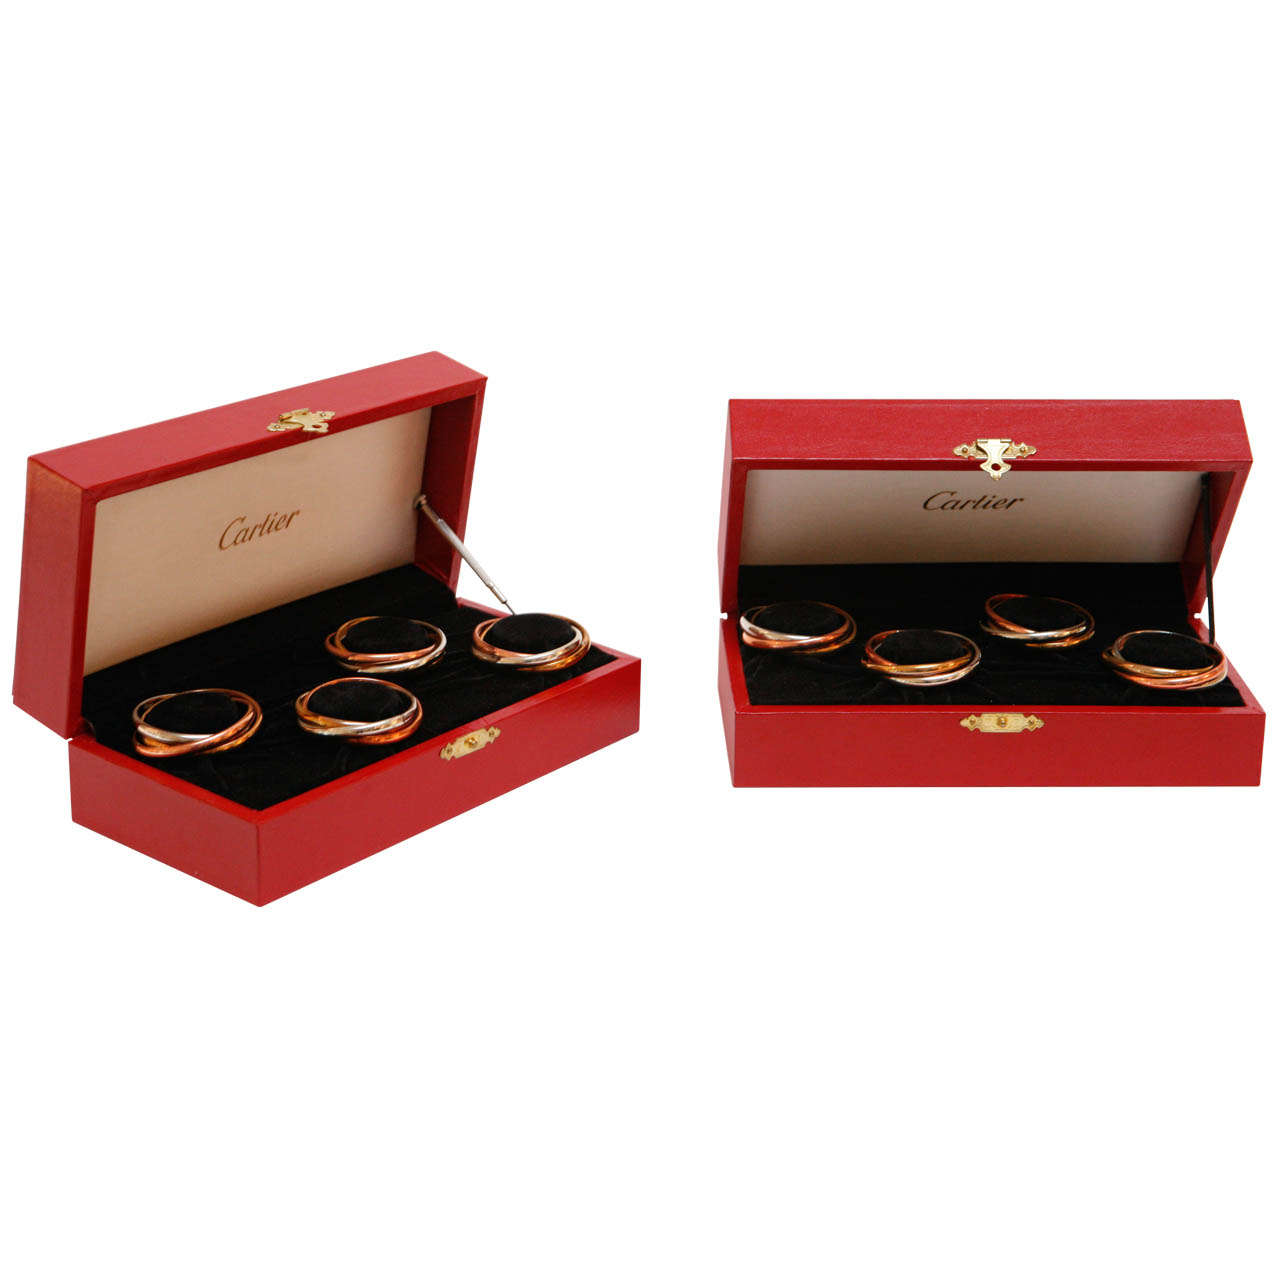 Set of Eight Trinity Napkin Rings in Original Boxes by Cartier